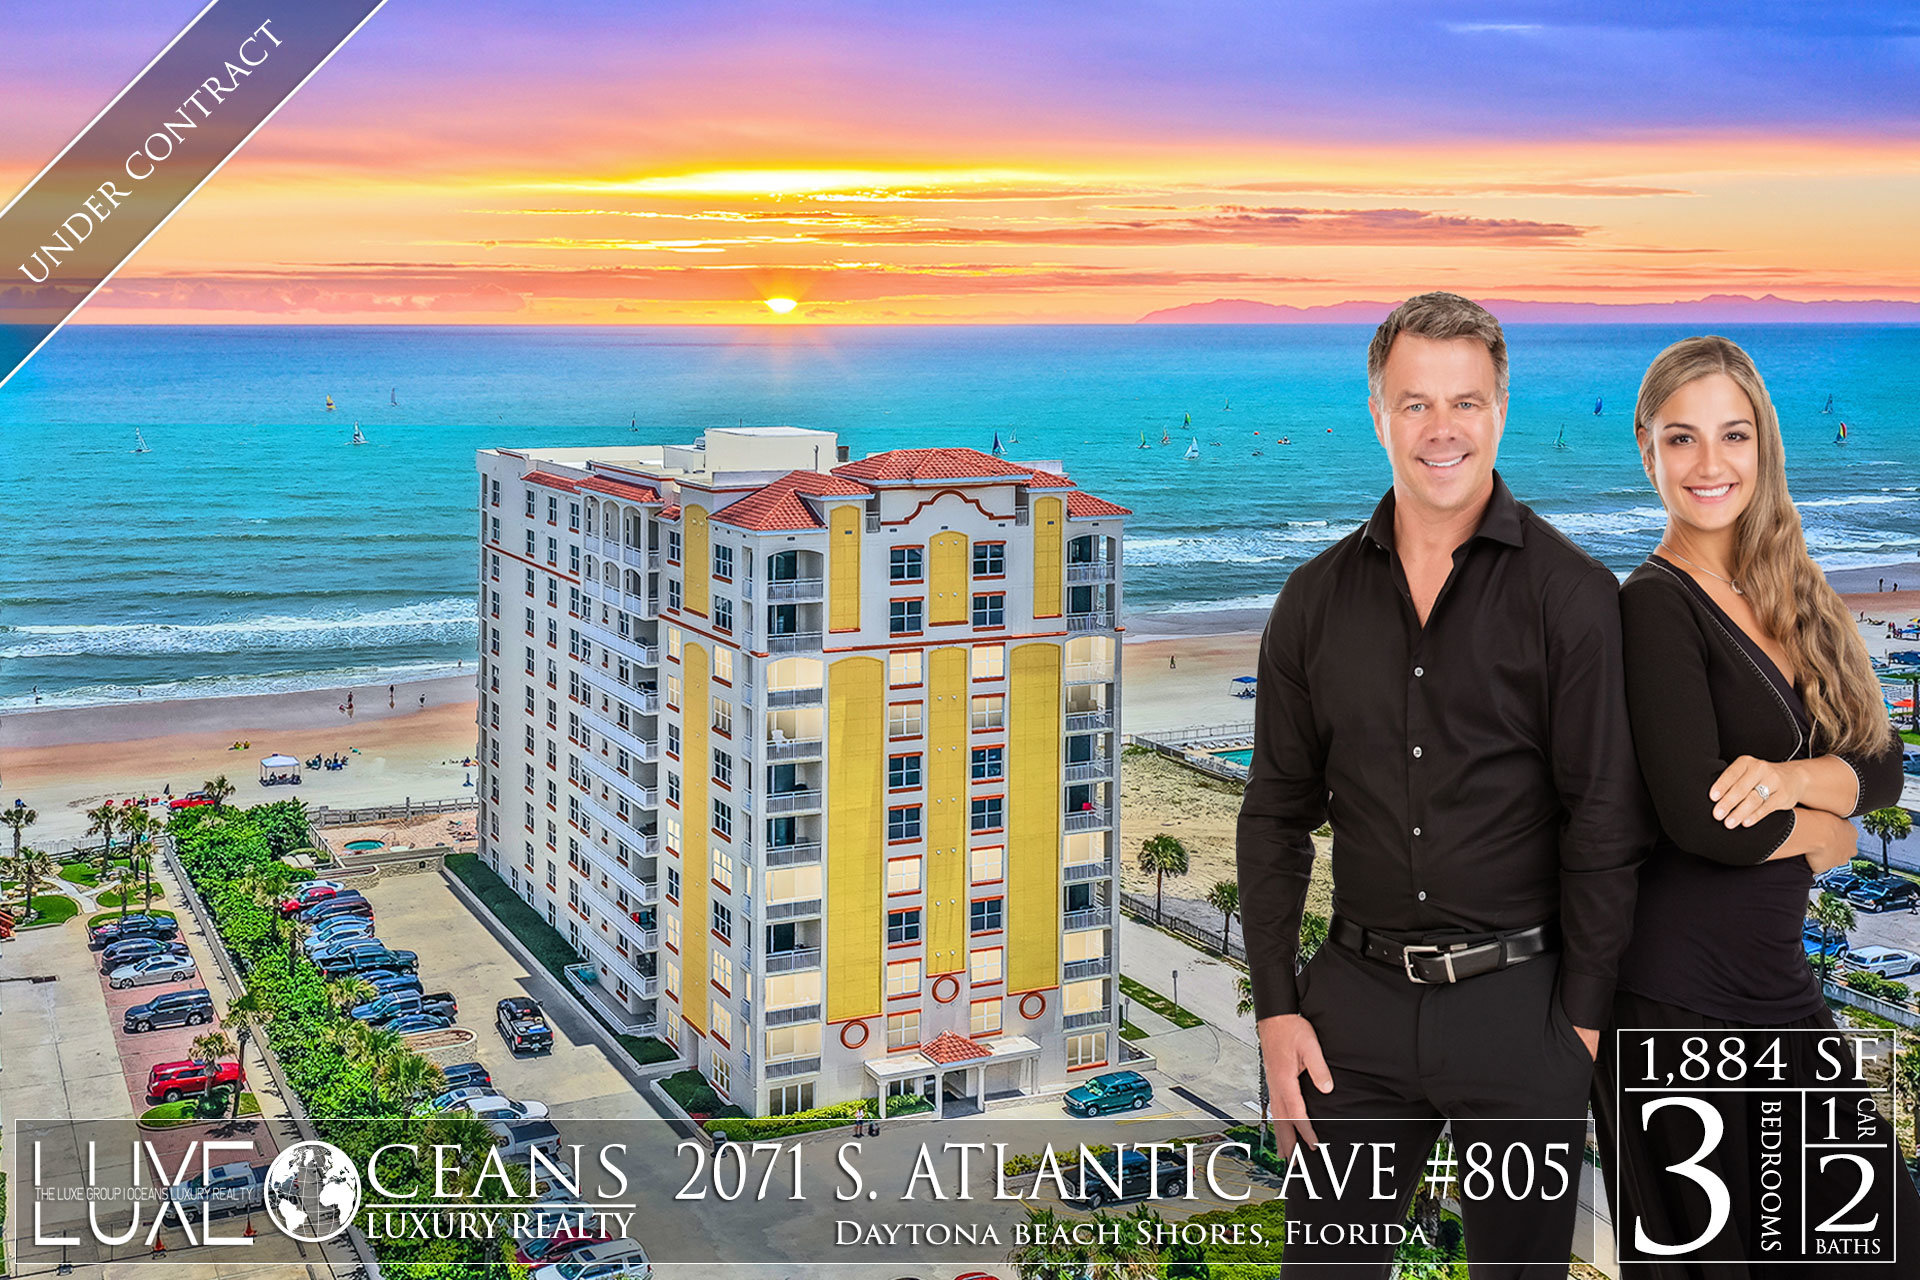 Opus Condos For Sale Oceanfront Real Estate at 2071 S Atlantic Ave Daytona Beach Shores, FL 805 Under Contract